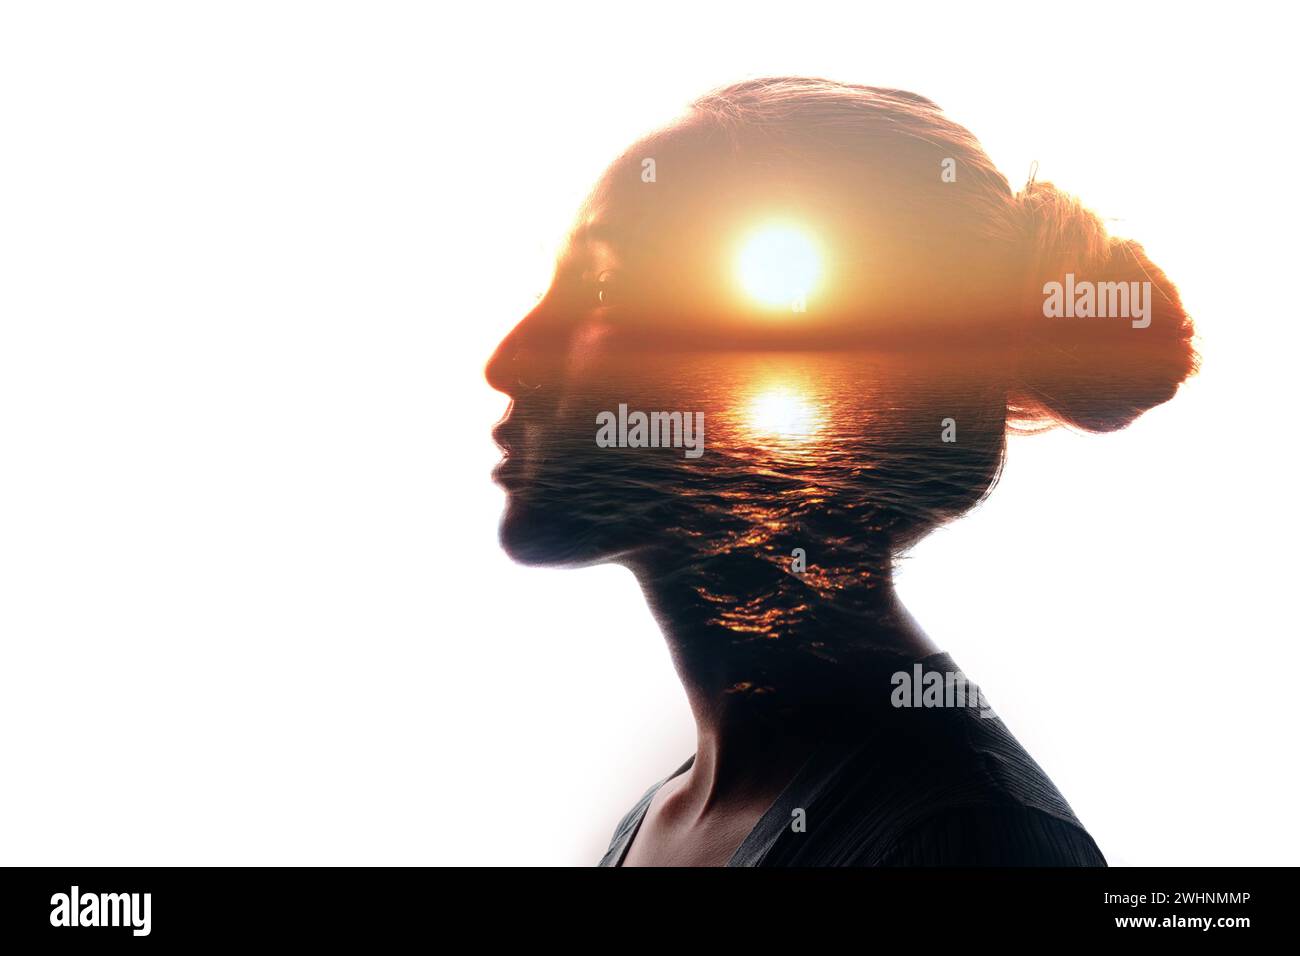 Woman brain mindset psychology concept. Mental health and intuition Stock Photo